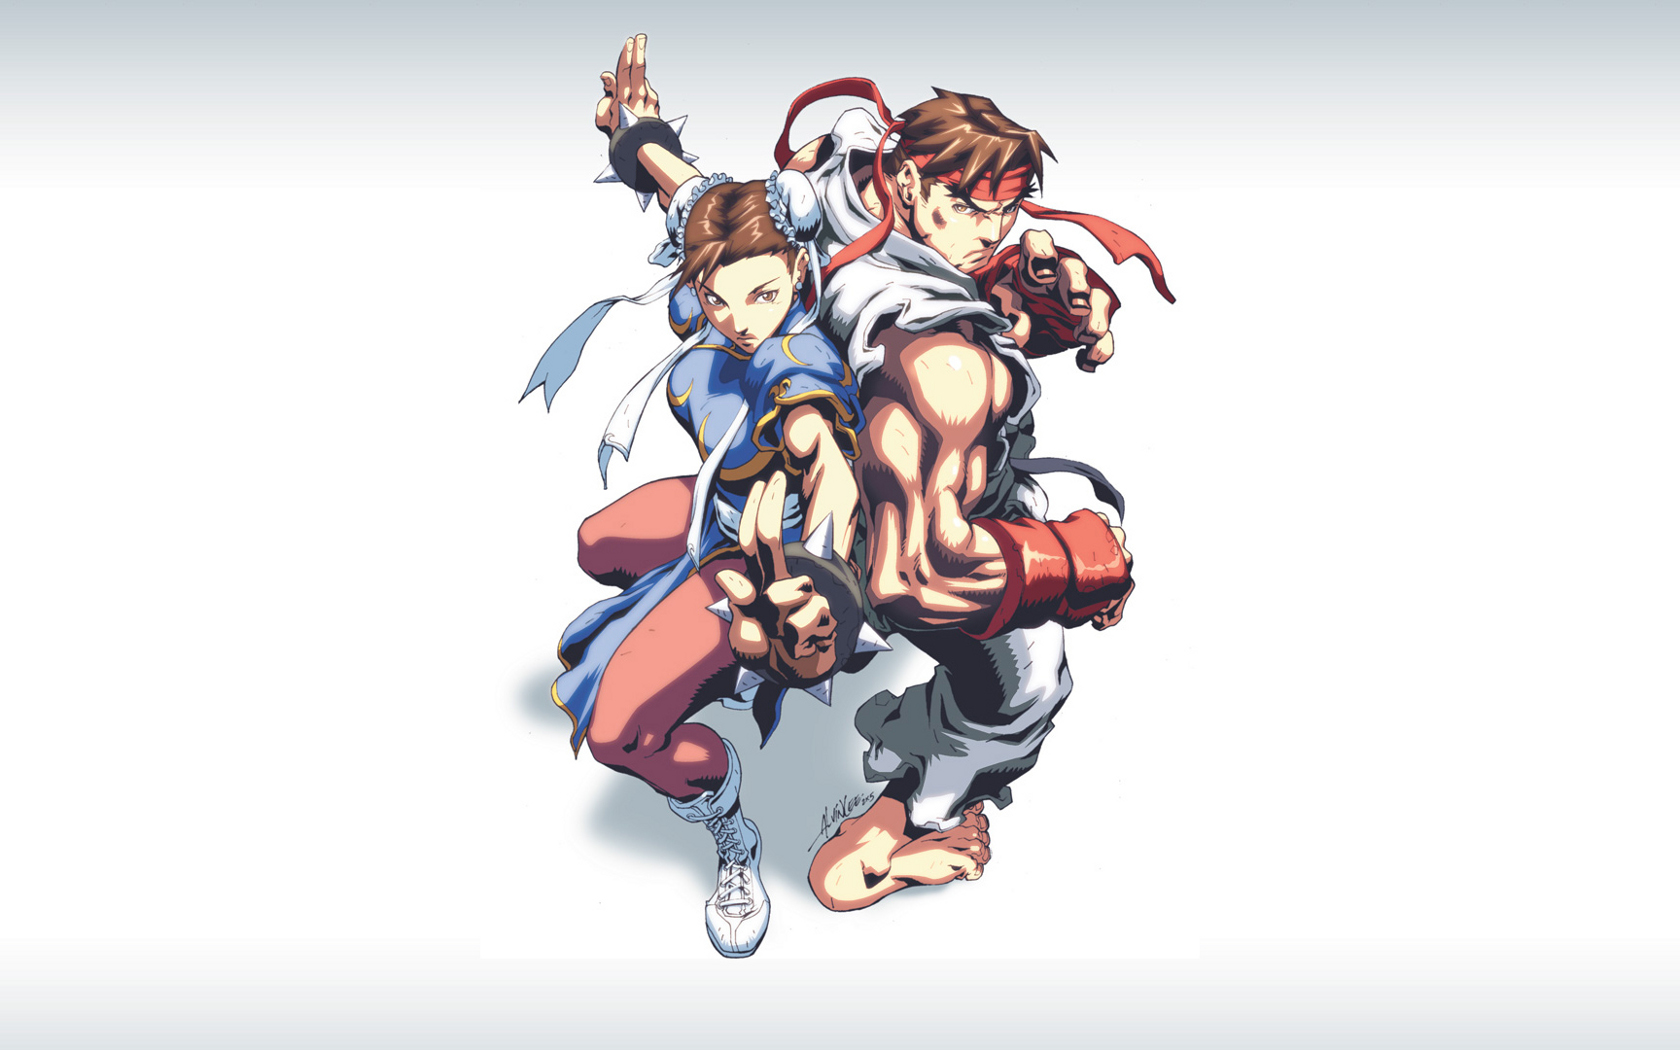 Street Fighter HD Wallpaper And Background